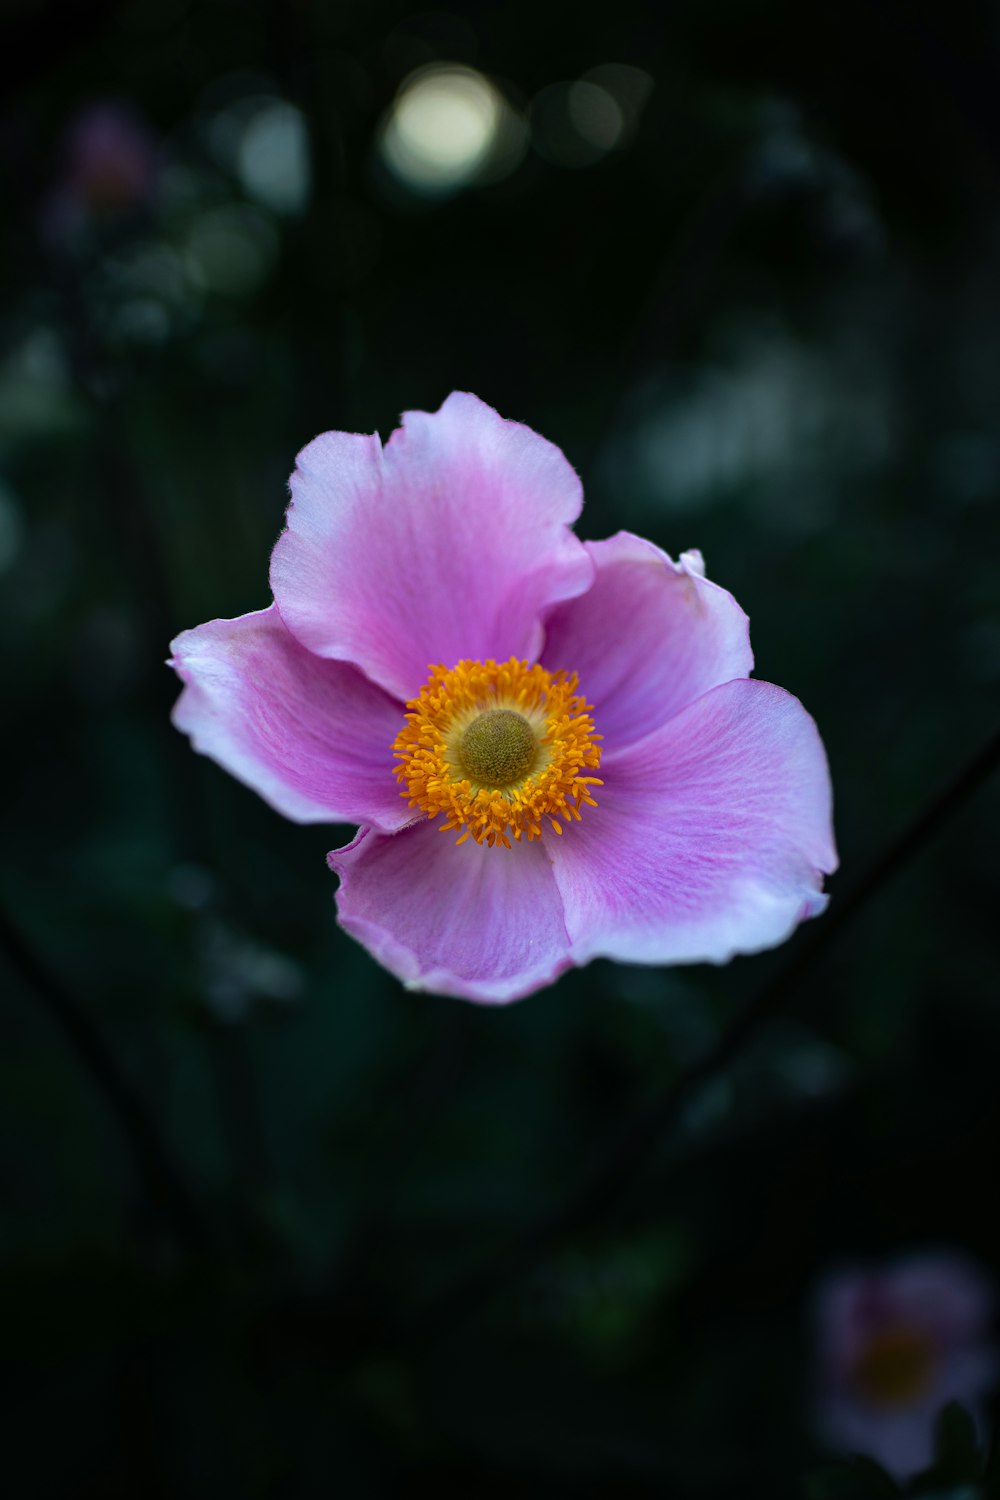 a large pink flower with a yellow center